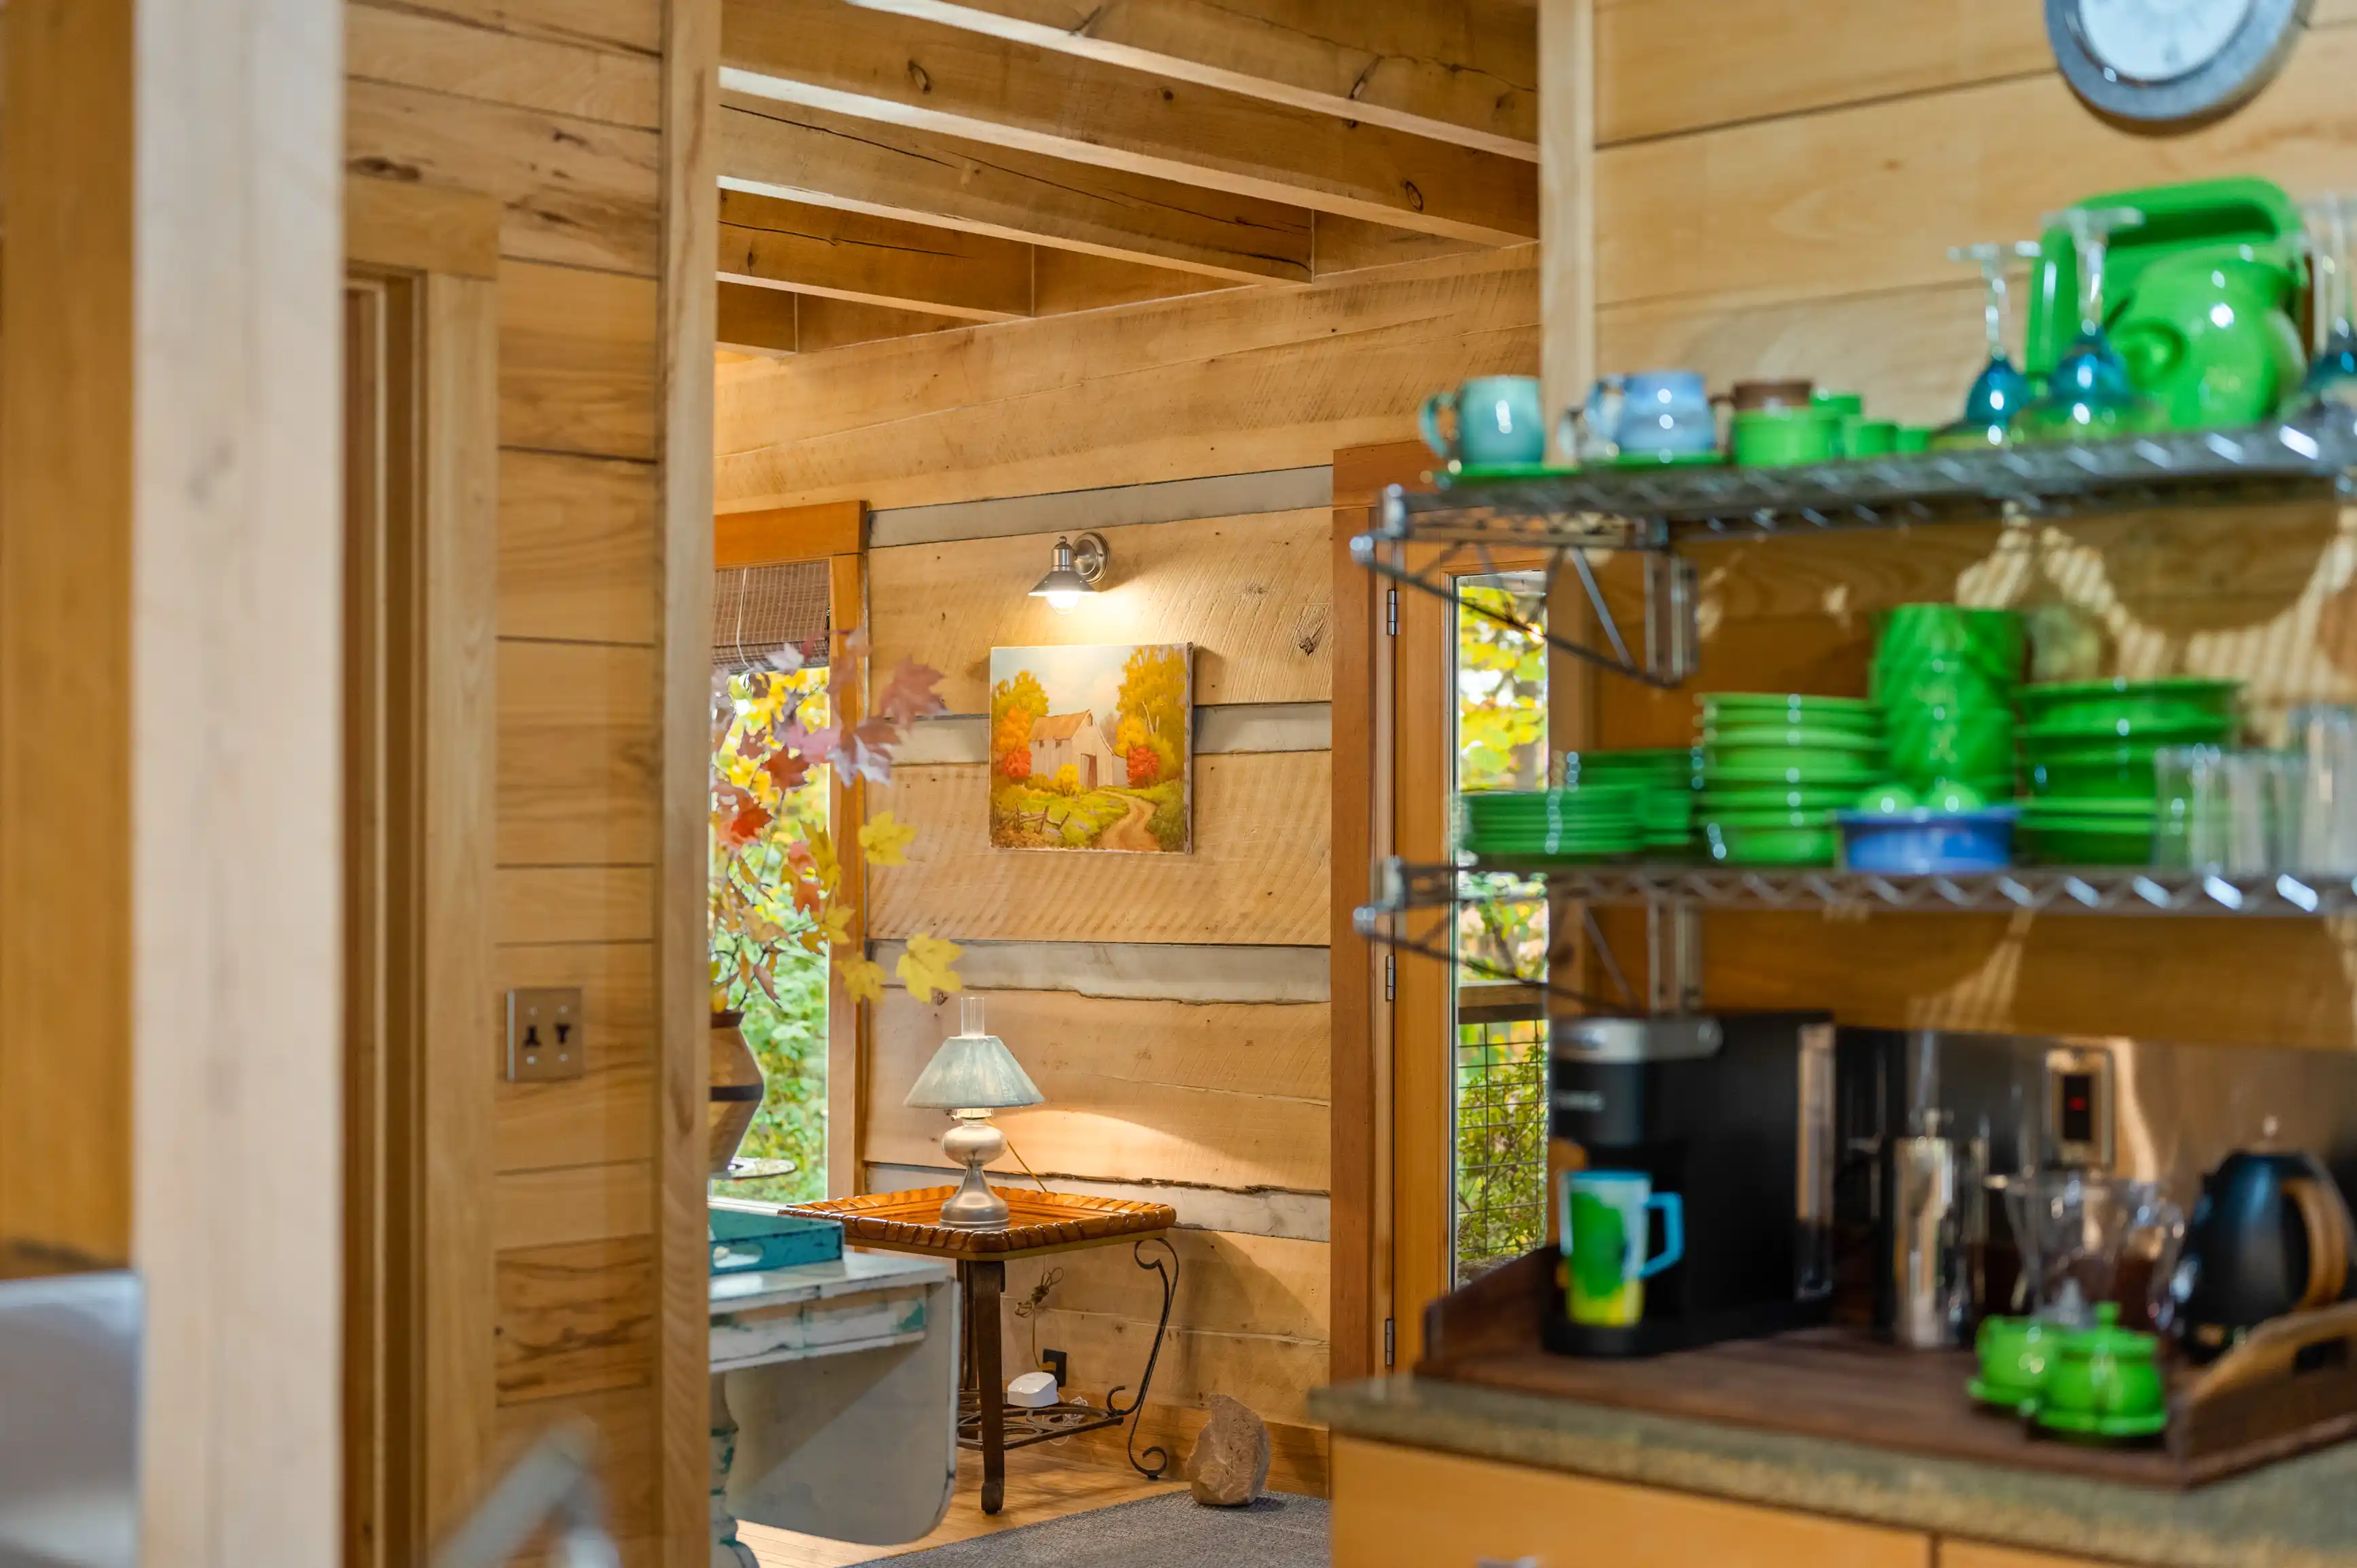 Cozy wooden cabin interior with a focus on a well-organized kitchen shelf stocked with green ceramics and silver appliances, adjacent to a warm sitting area with a lamp and a small table, all bathed in natural light filtering through autumn leaves visible through a window.